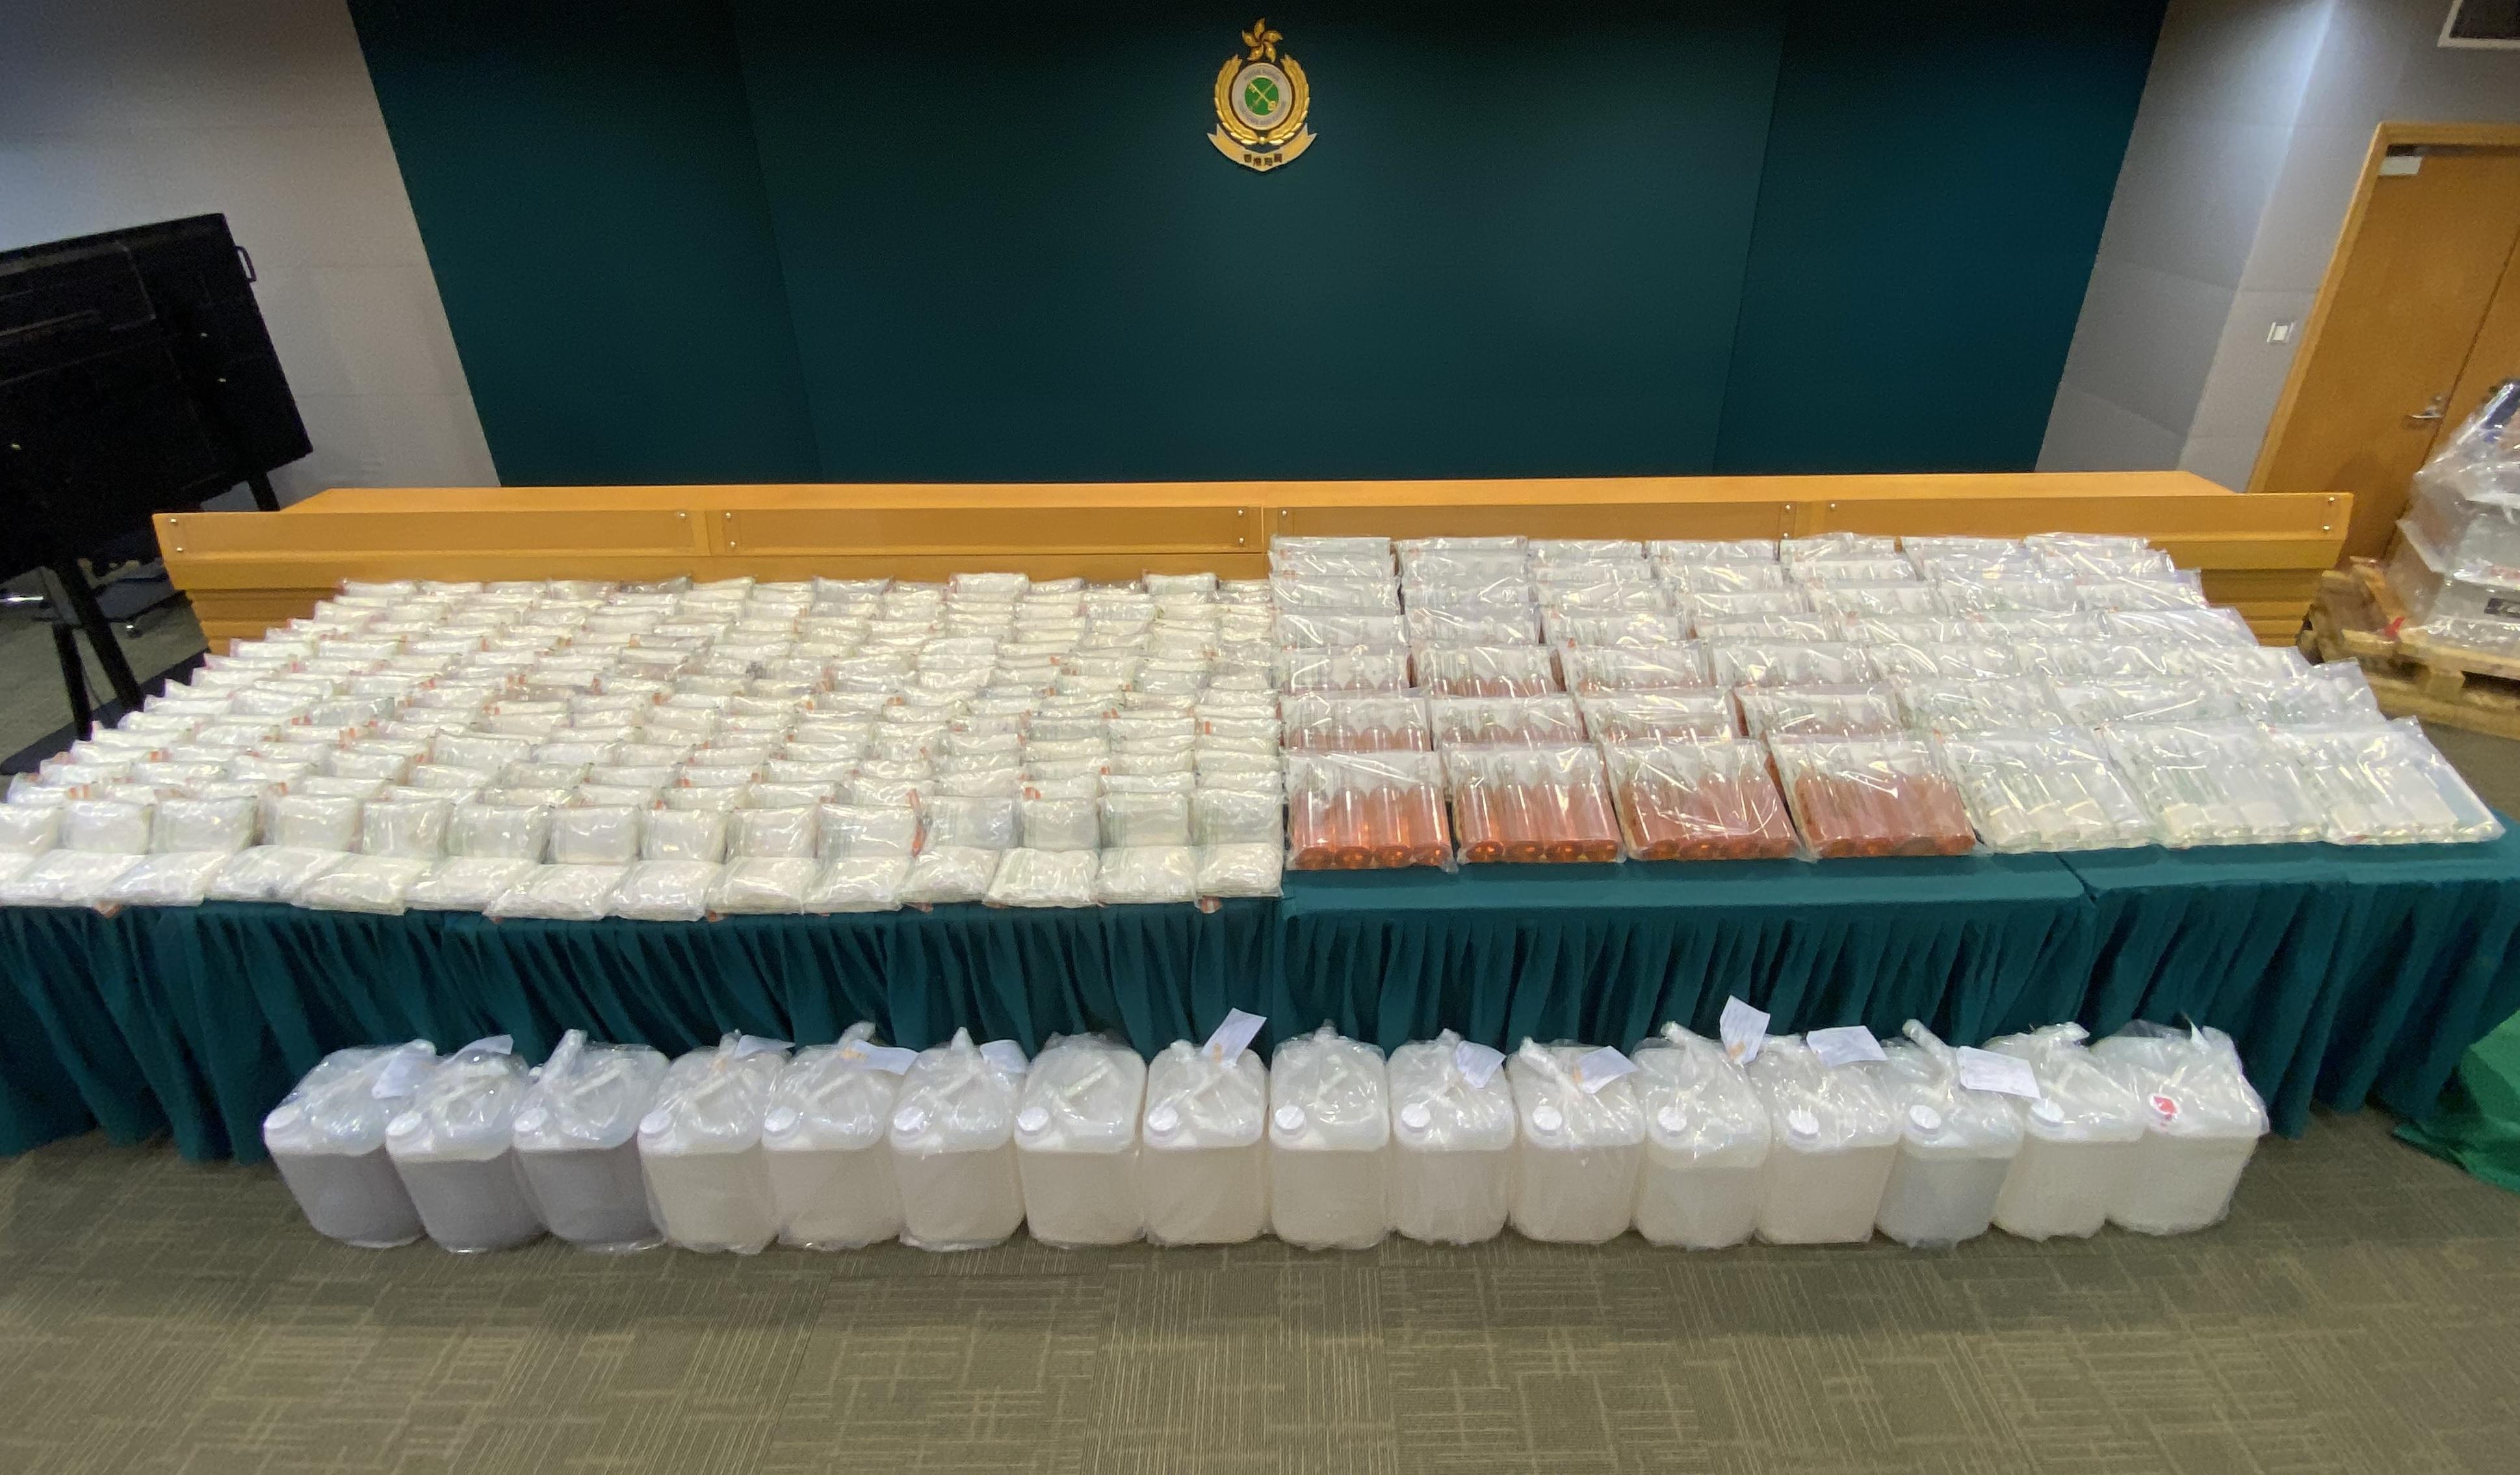 Hong Kong Customs jointly mounted an anti-narcotics operation, codenamed "Yunzhan-duanliu", with the anti-smuggling departments of the Mainland Customs in March. Hong Kong Customs seized about 700 kilograms of suspected methamphetamine with an estimated market value of $400 million in the operation. Picture shows the suspected methamphetamine seized.